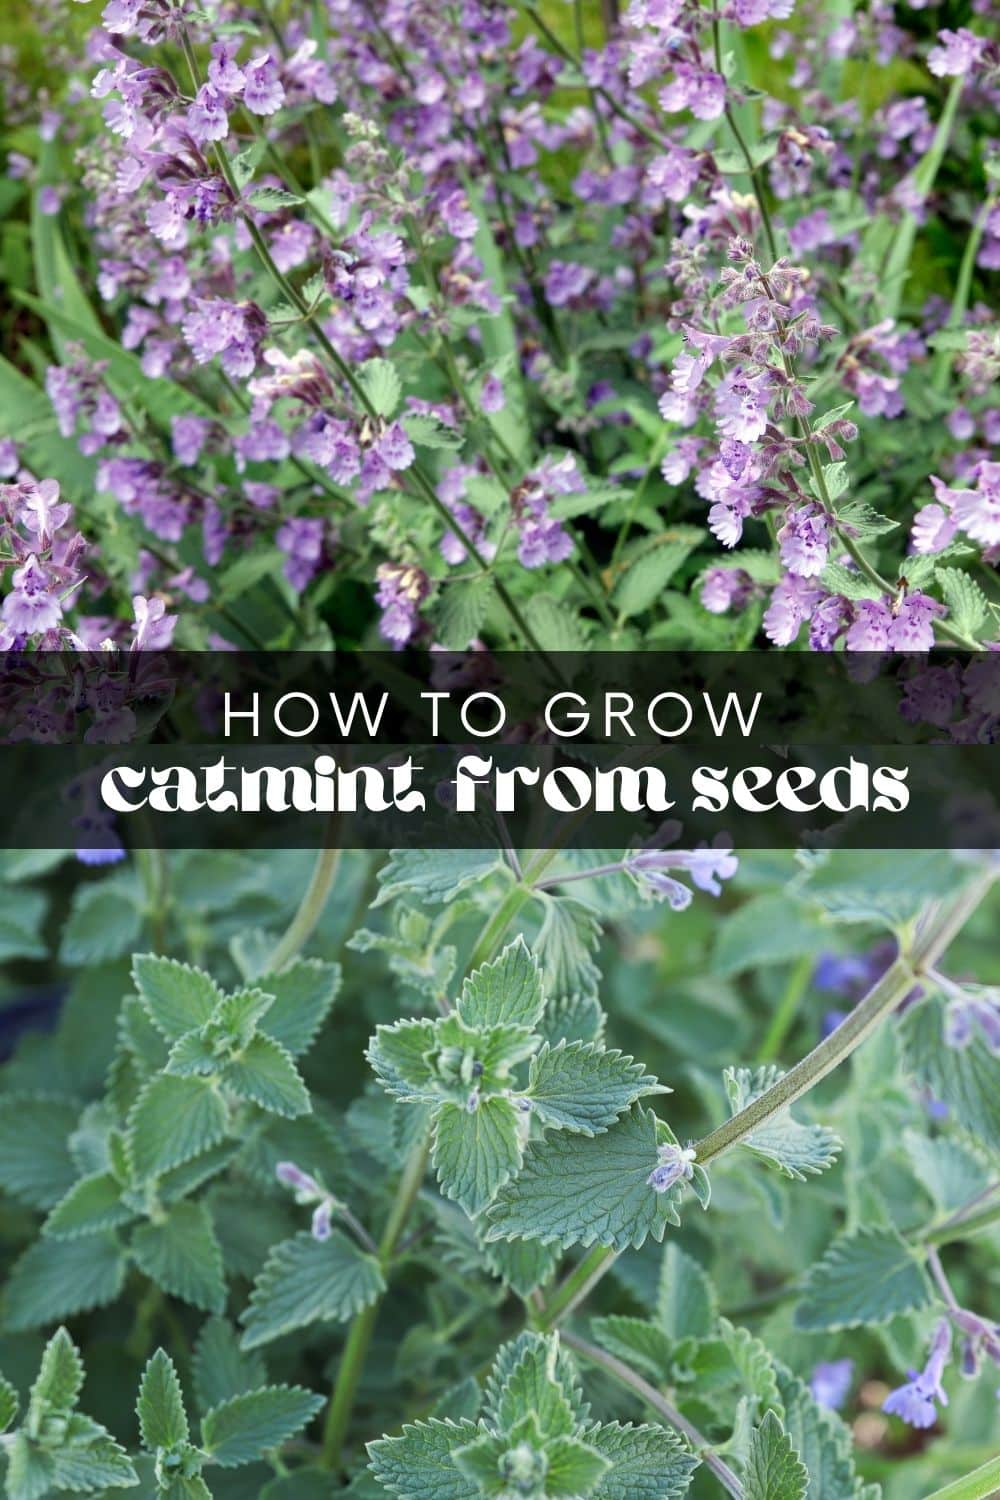 If you're looking for an easy and low-maintenance plant, catmint is an excellent choice. After all, who doesn't love a plant that will bloom for months, attract pollinators, AND is drought tolerant? Once you know how to grow catmint, you'll be surprised at how resilient and versatile this hardy perennial herb truly is.